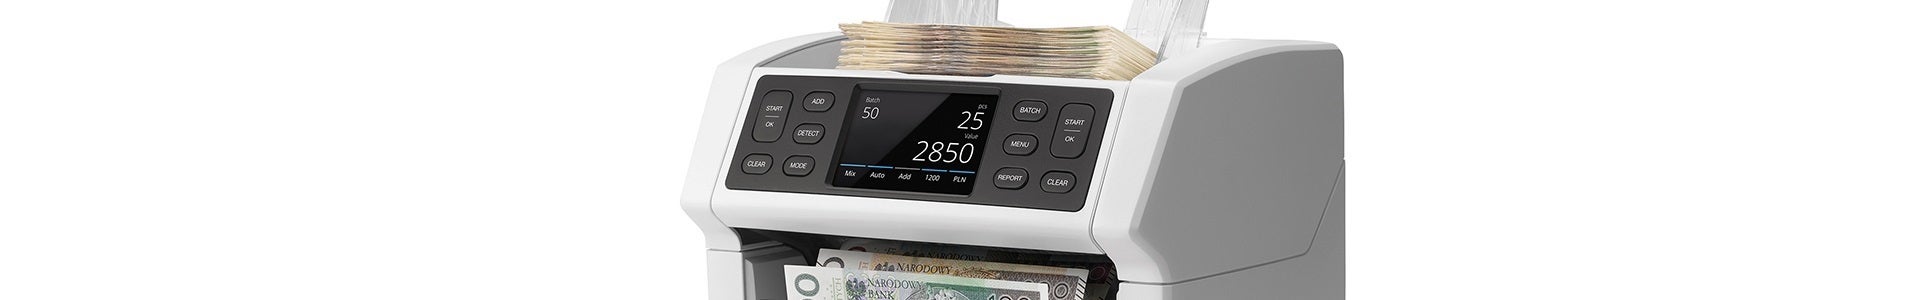 Banknote Counters 2